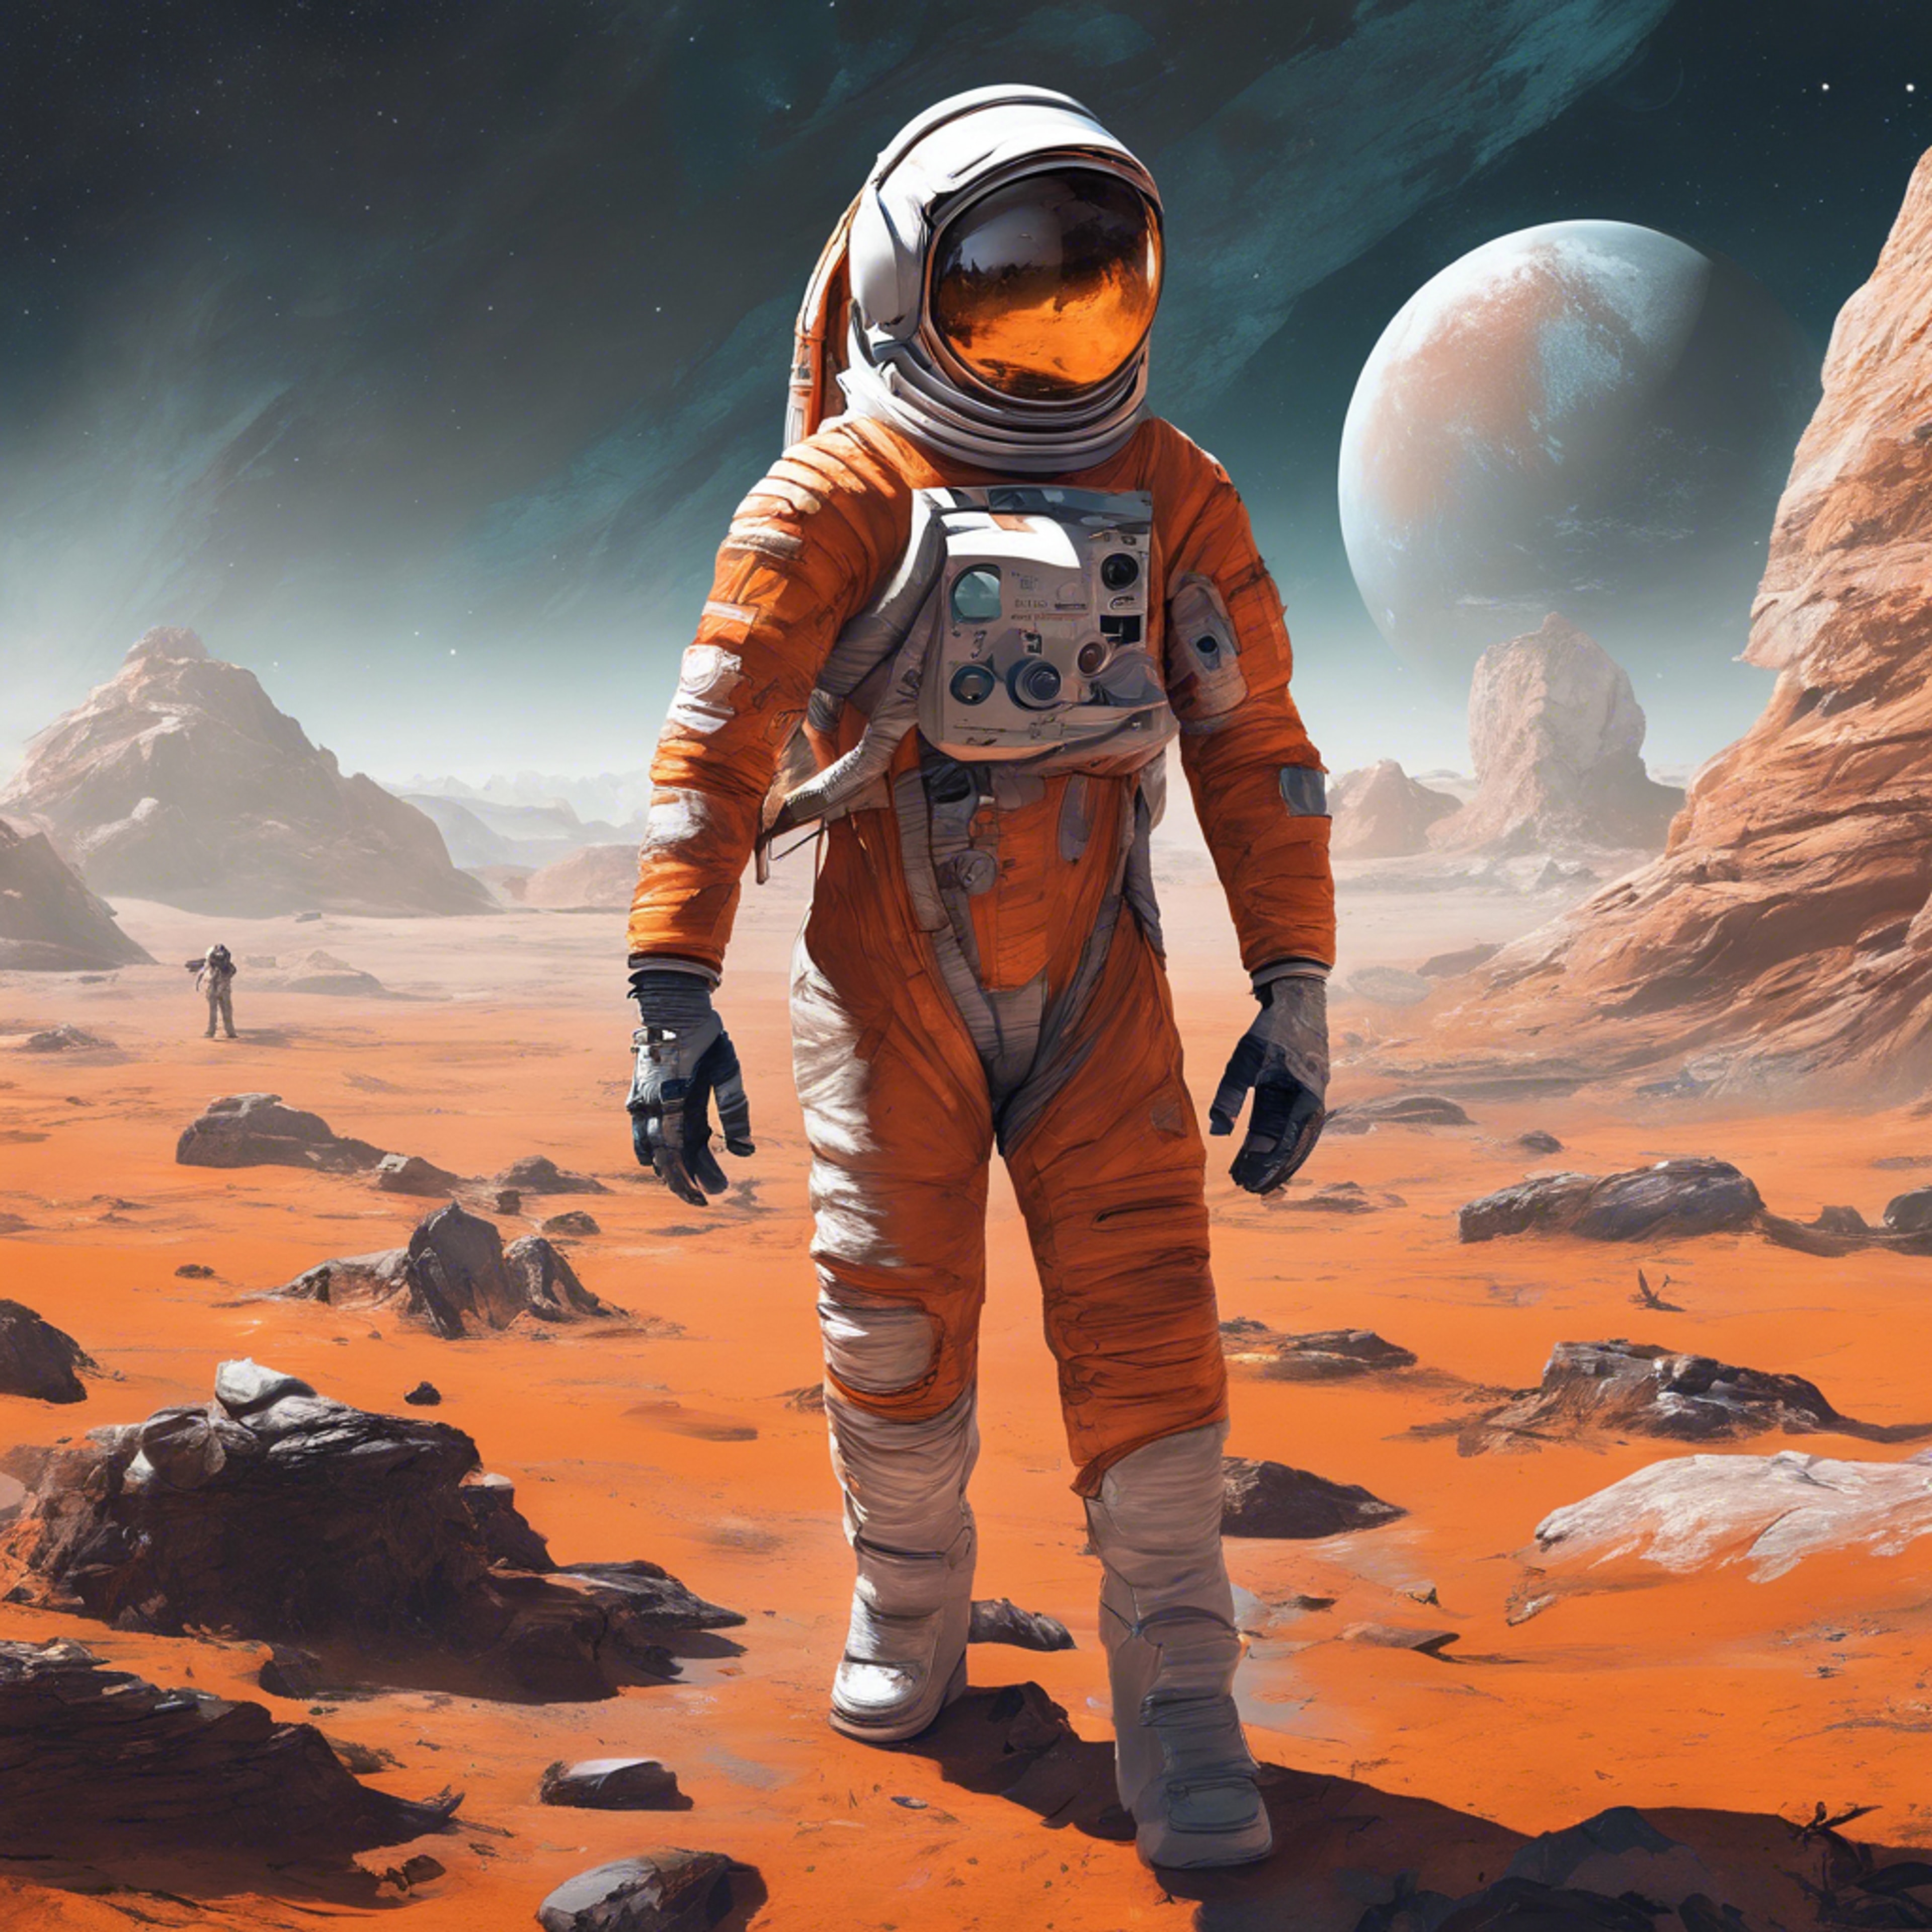 A space-themed video game featuring an astronaut in an orange and white suit exploring an alien planet. Tapeet[5d2c49abc07a4c83ad01]